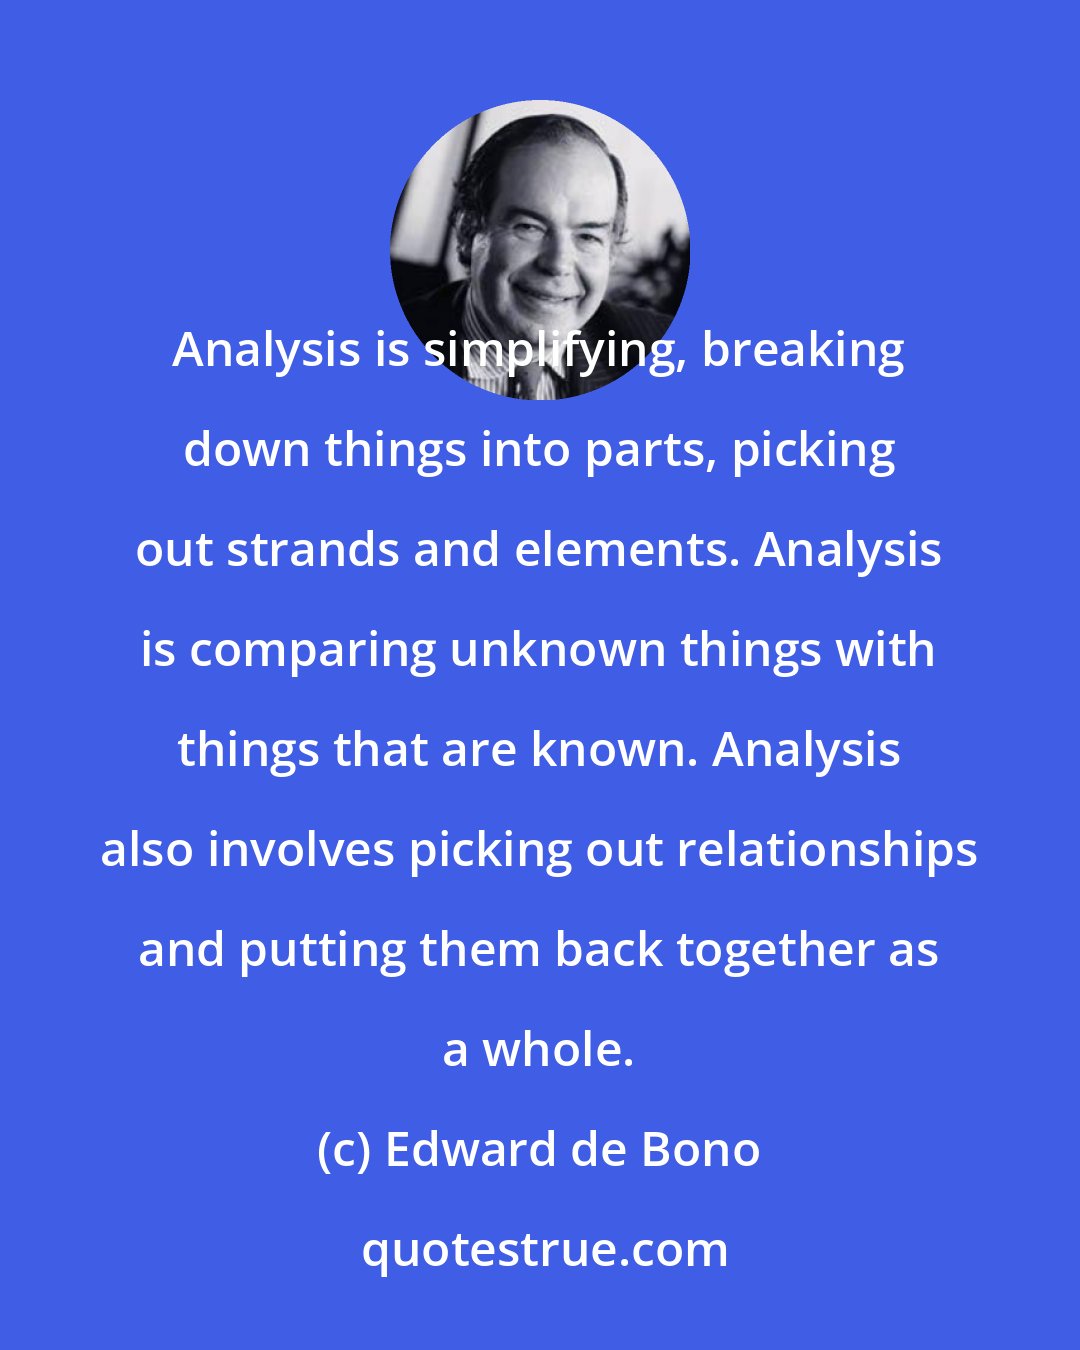 Edward de Bono: Analysis is simplifying, breaking down things into parts, picking out strands and elements. Analysis is comparing unknown things with things that are known. Analysis also involves picking out relationships and putting them back together as a whole.